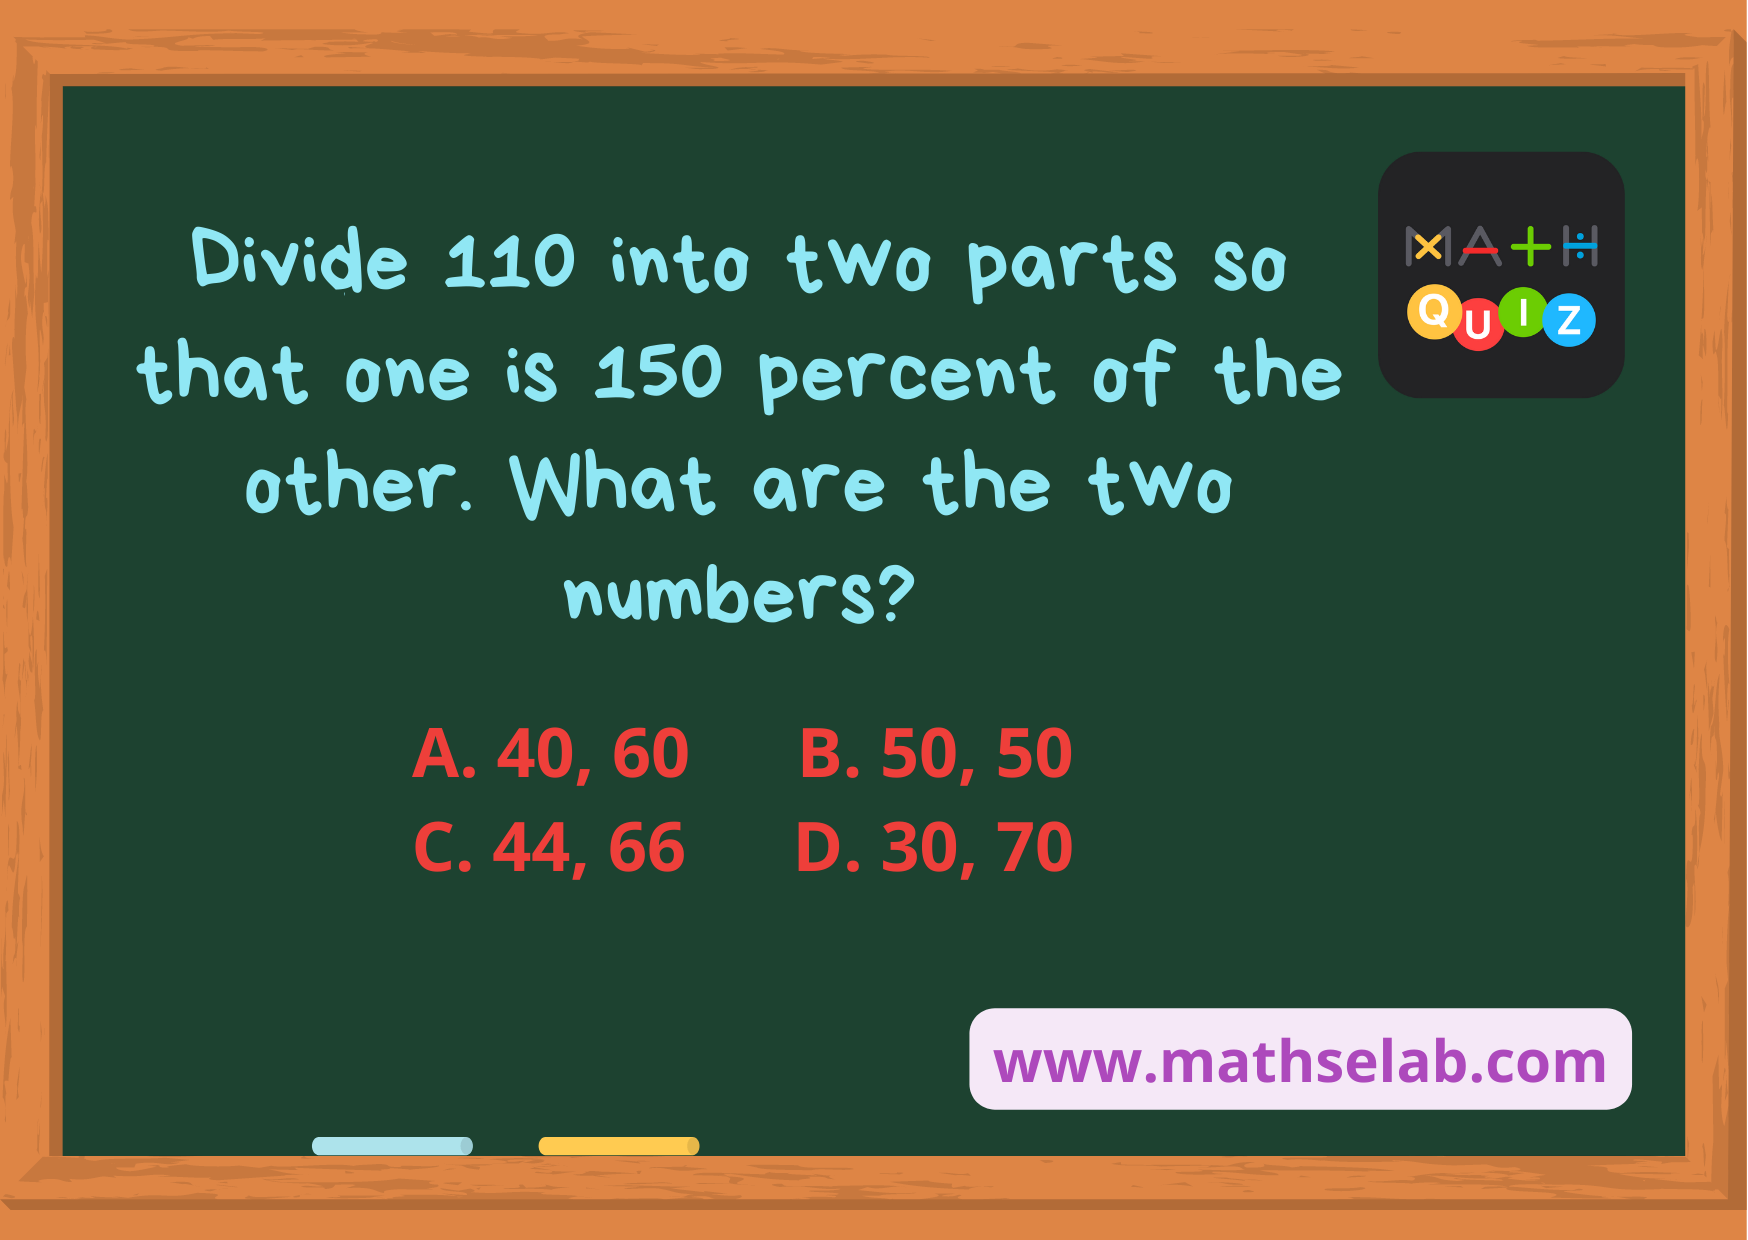 Divide 110 into two parts so that one is 150 percent of the other. What are the two numbers?